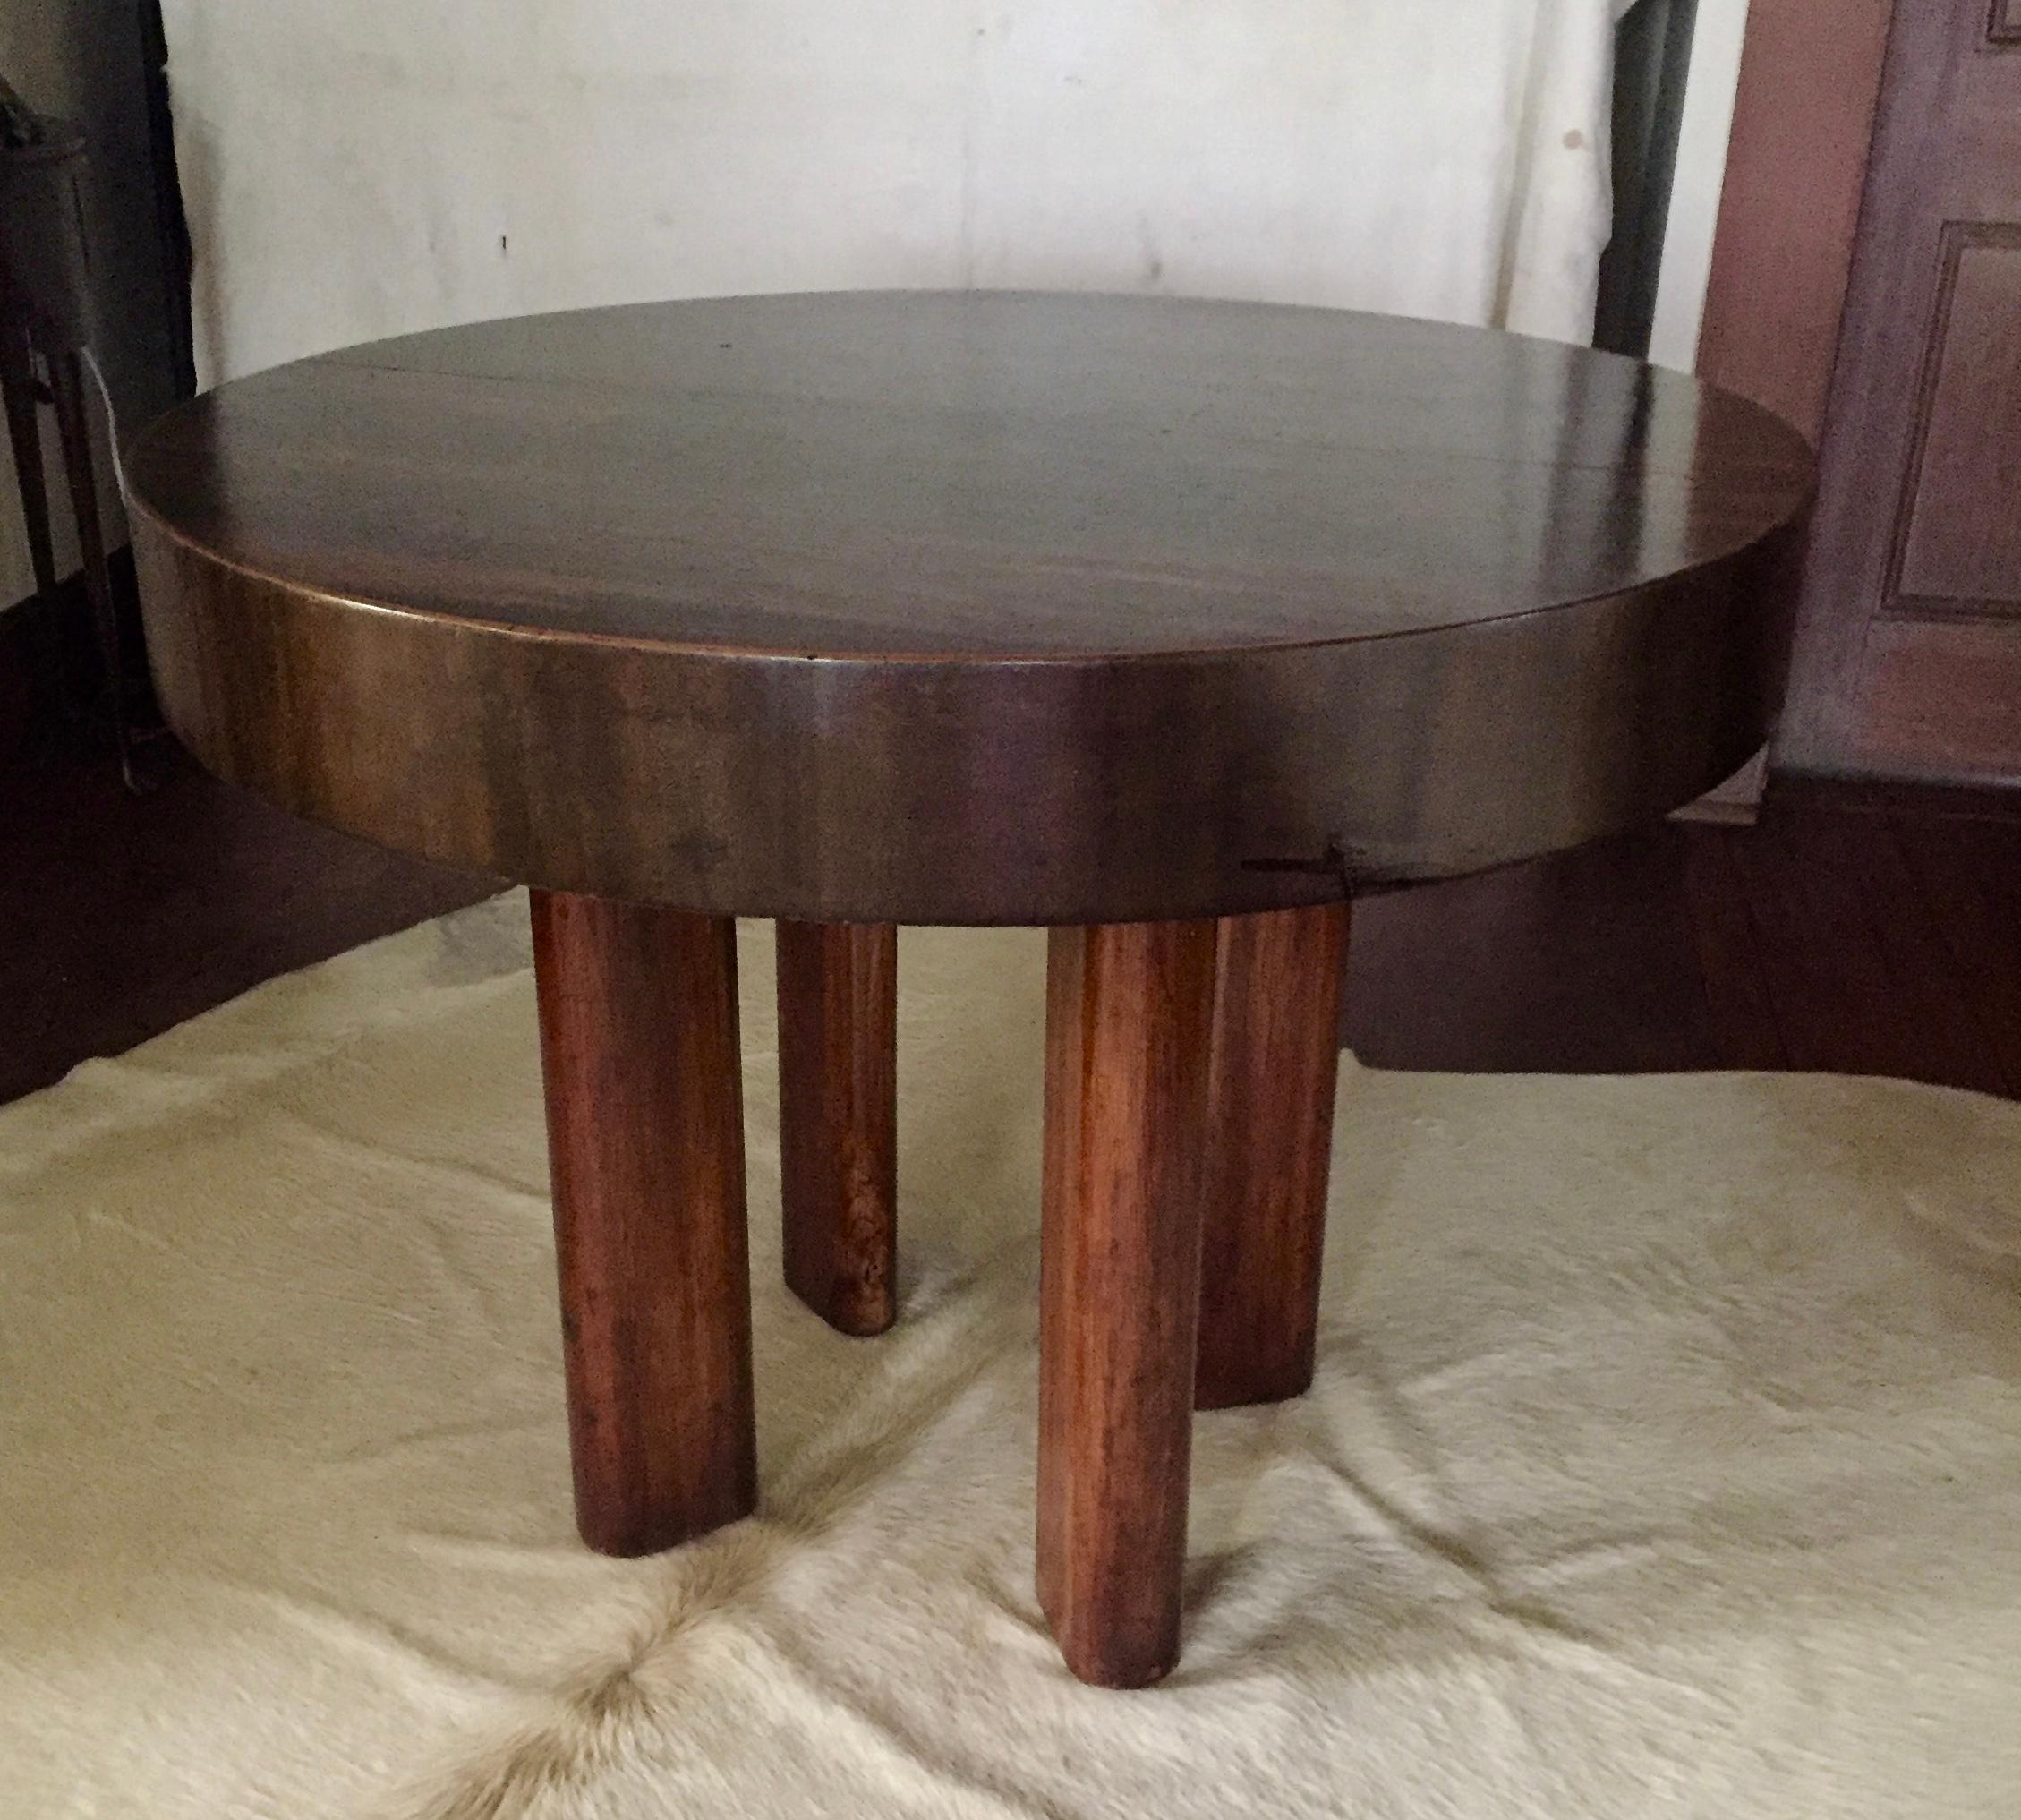 This table is as versatile as it is handsome. Its original purpose was as a dining table, but at some point in its long life, the leaves went missing, so it now it is a small dining table. However, it also functions beautifully as a centre hall